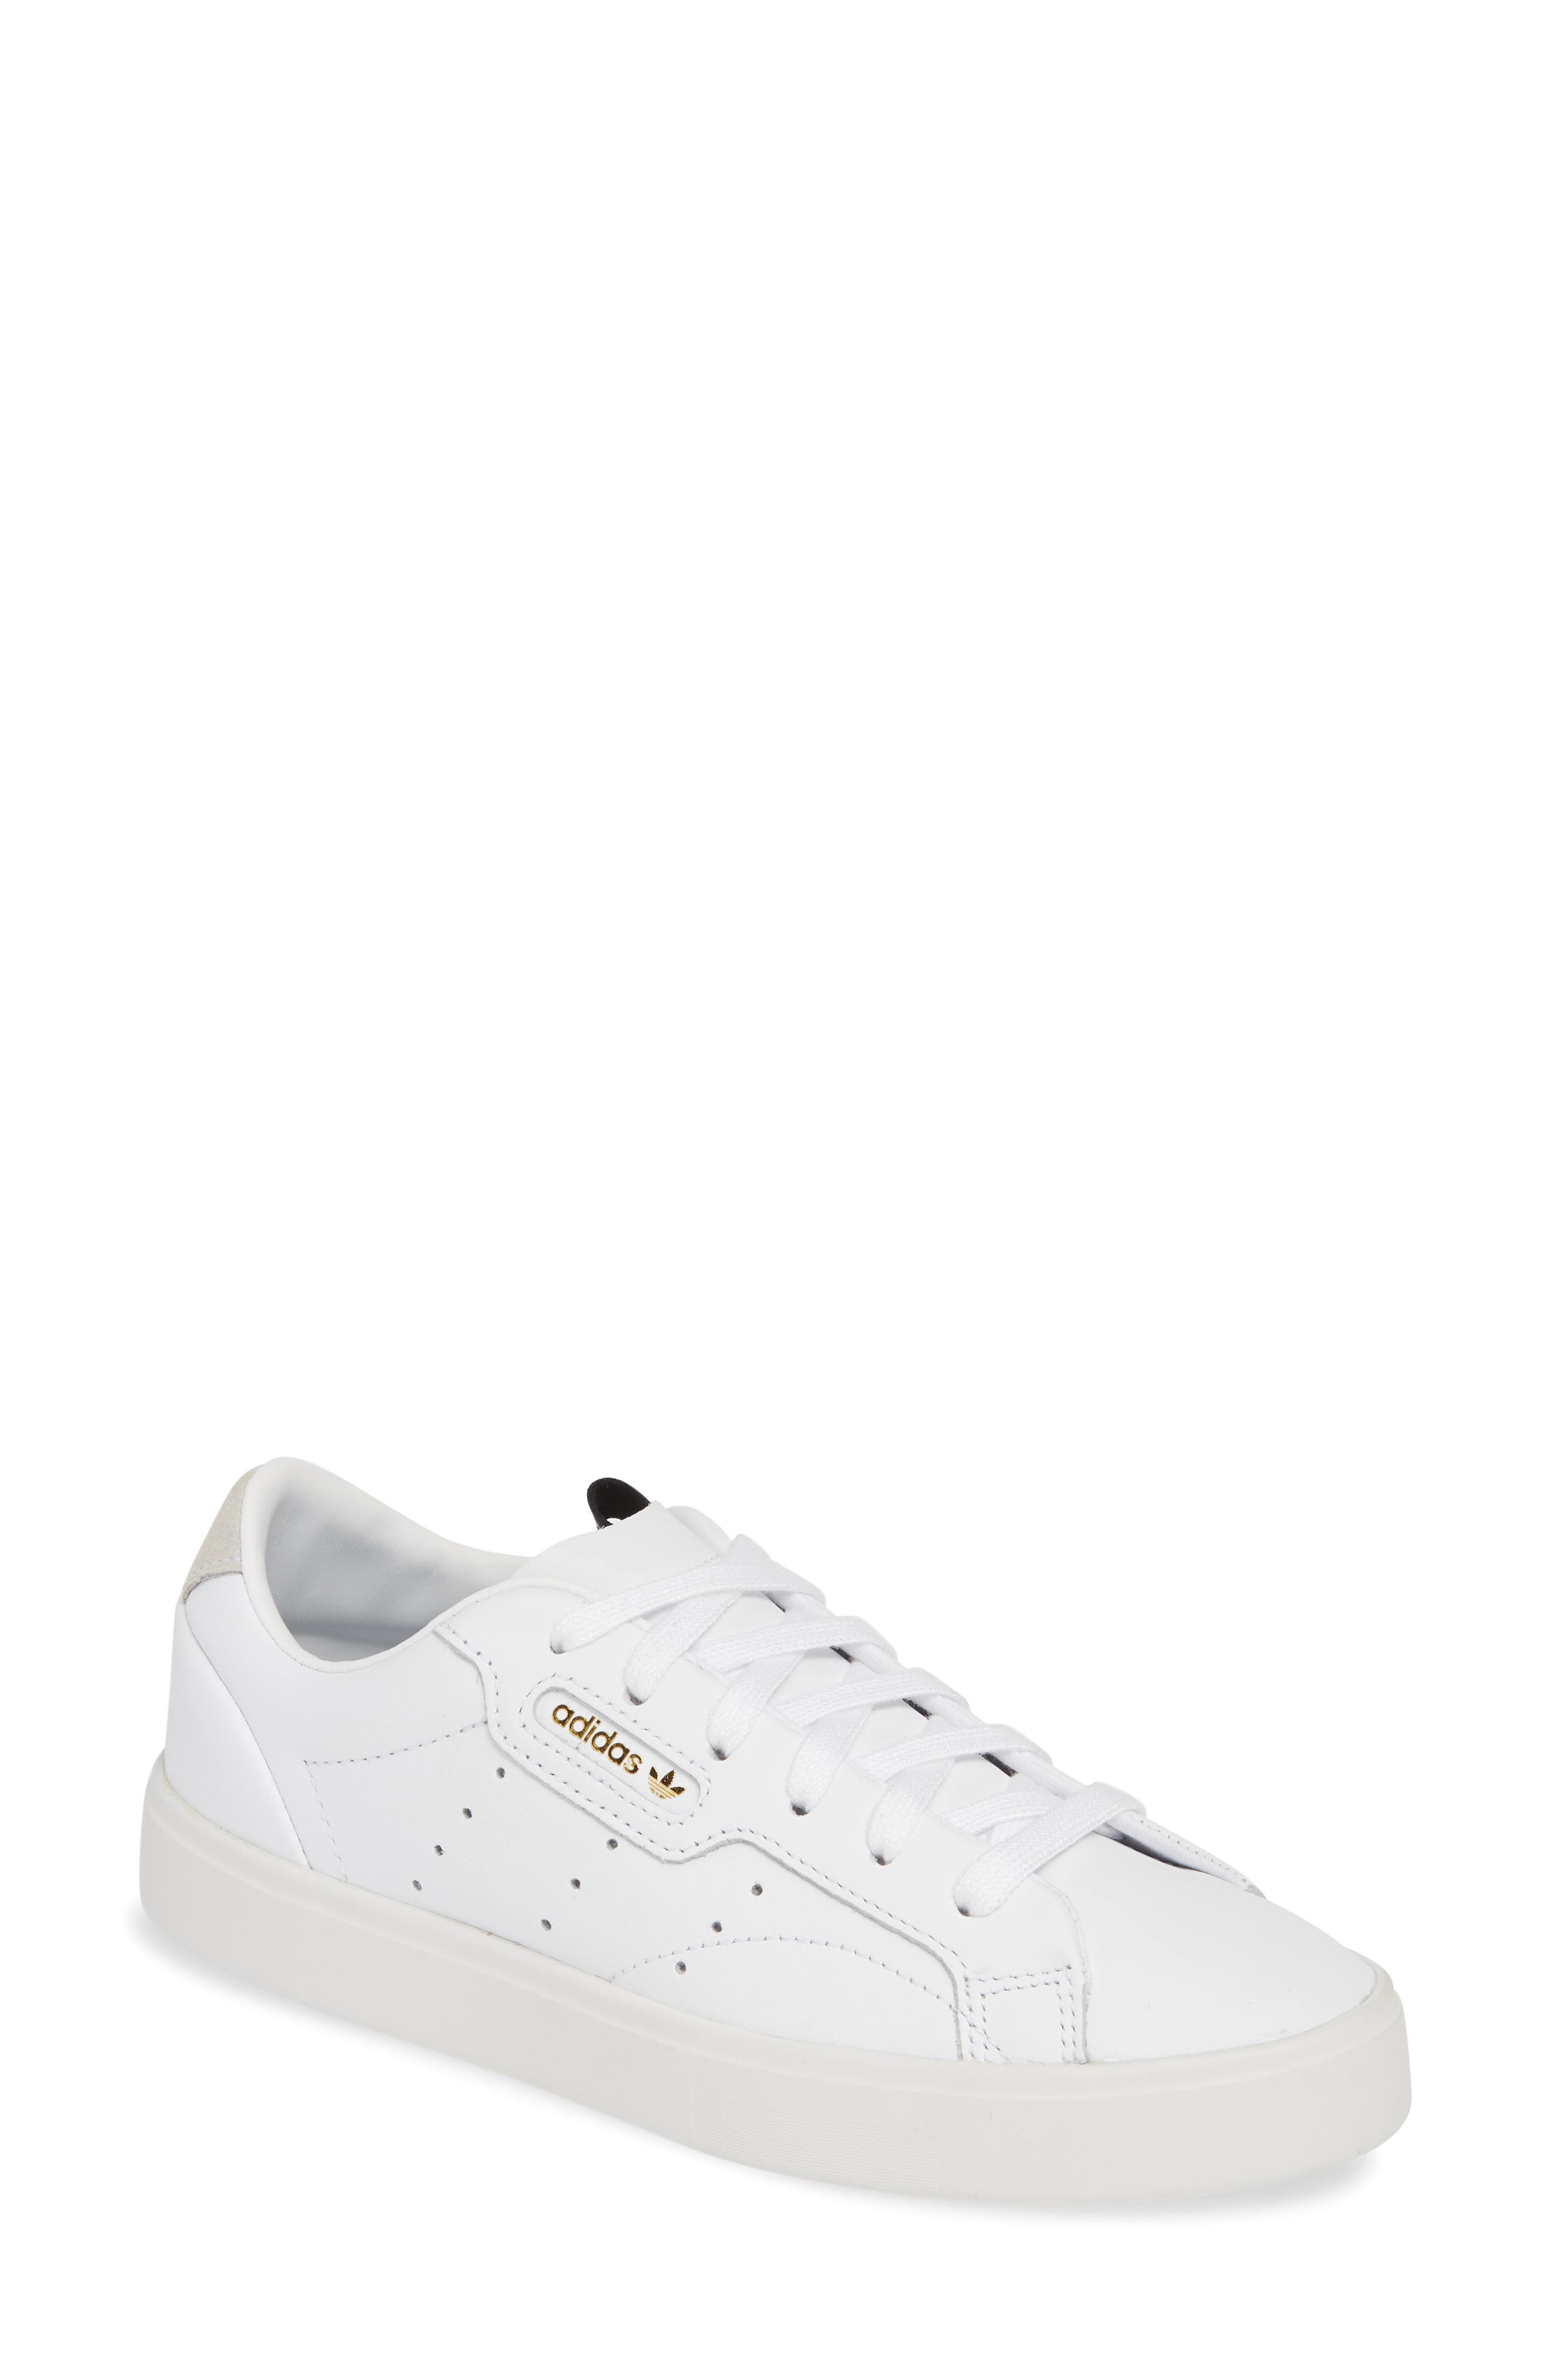 Women's adidas Shoes | Nordstrom